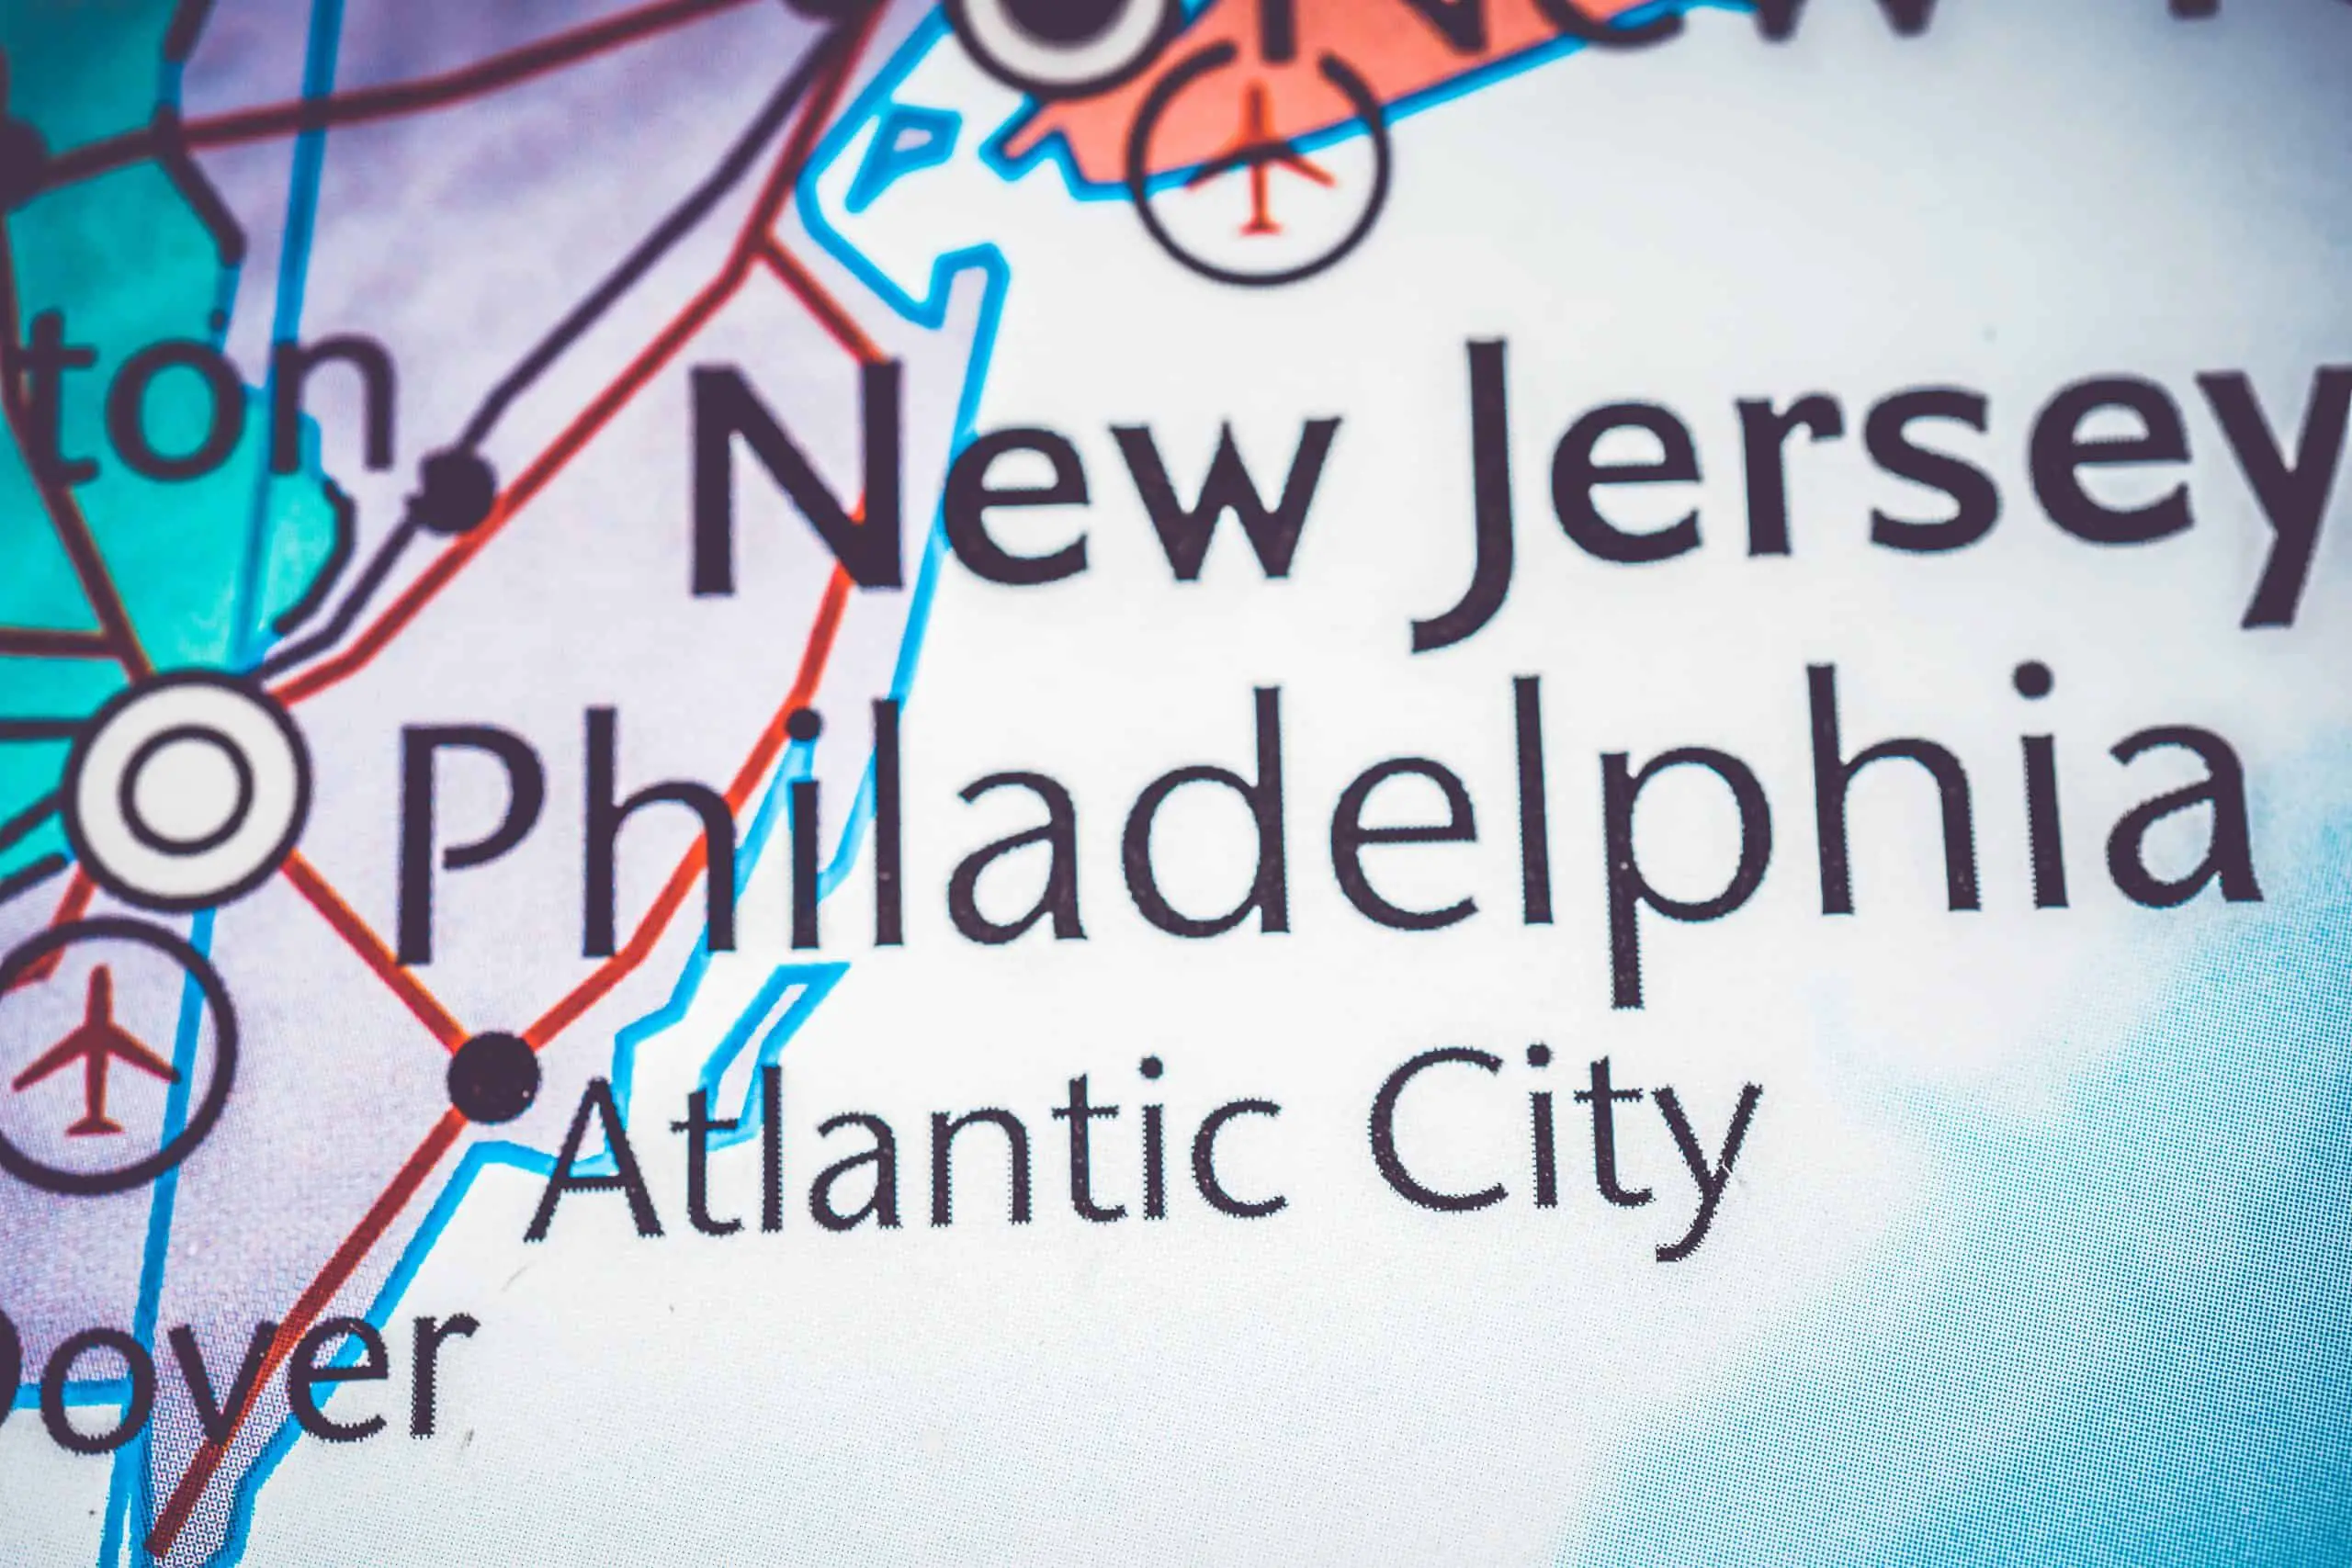 What Are The Pros And Cons Of Relocating To New Jersey?